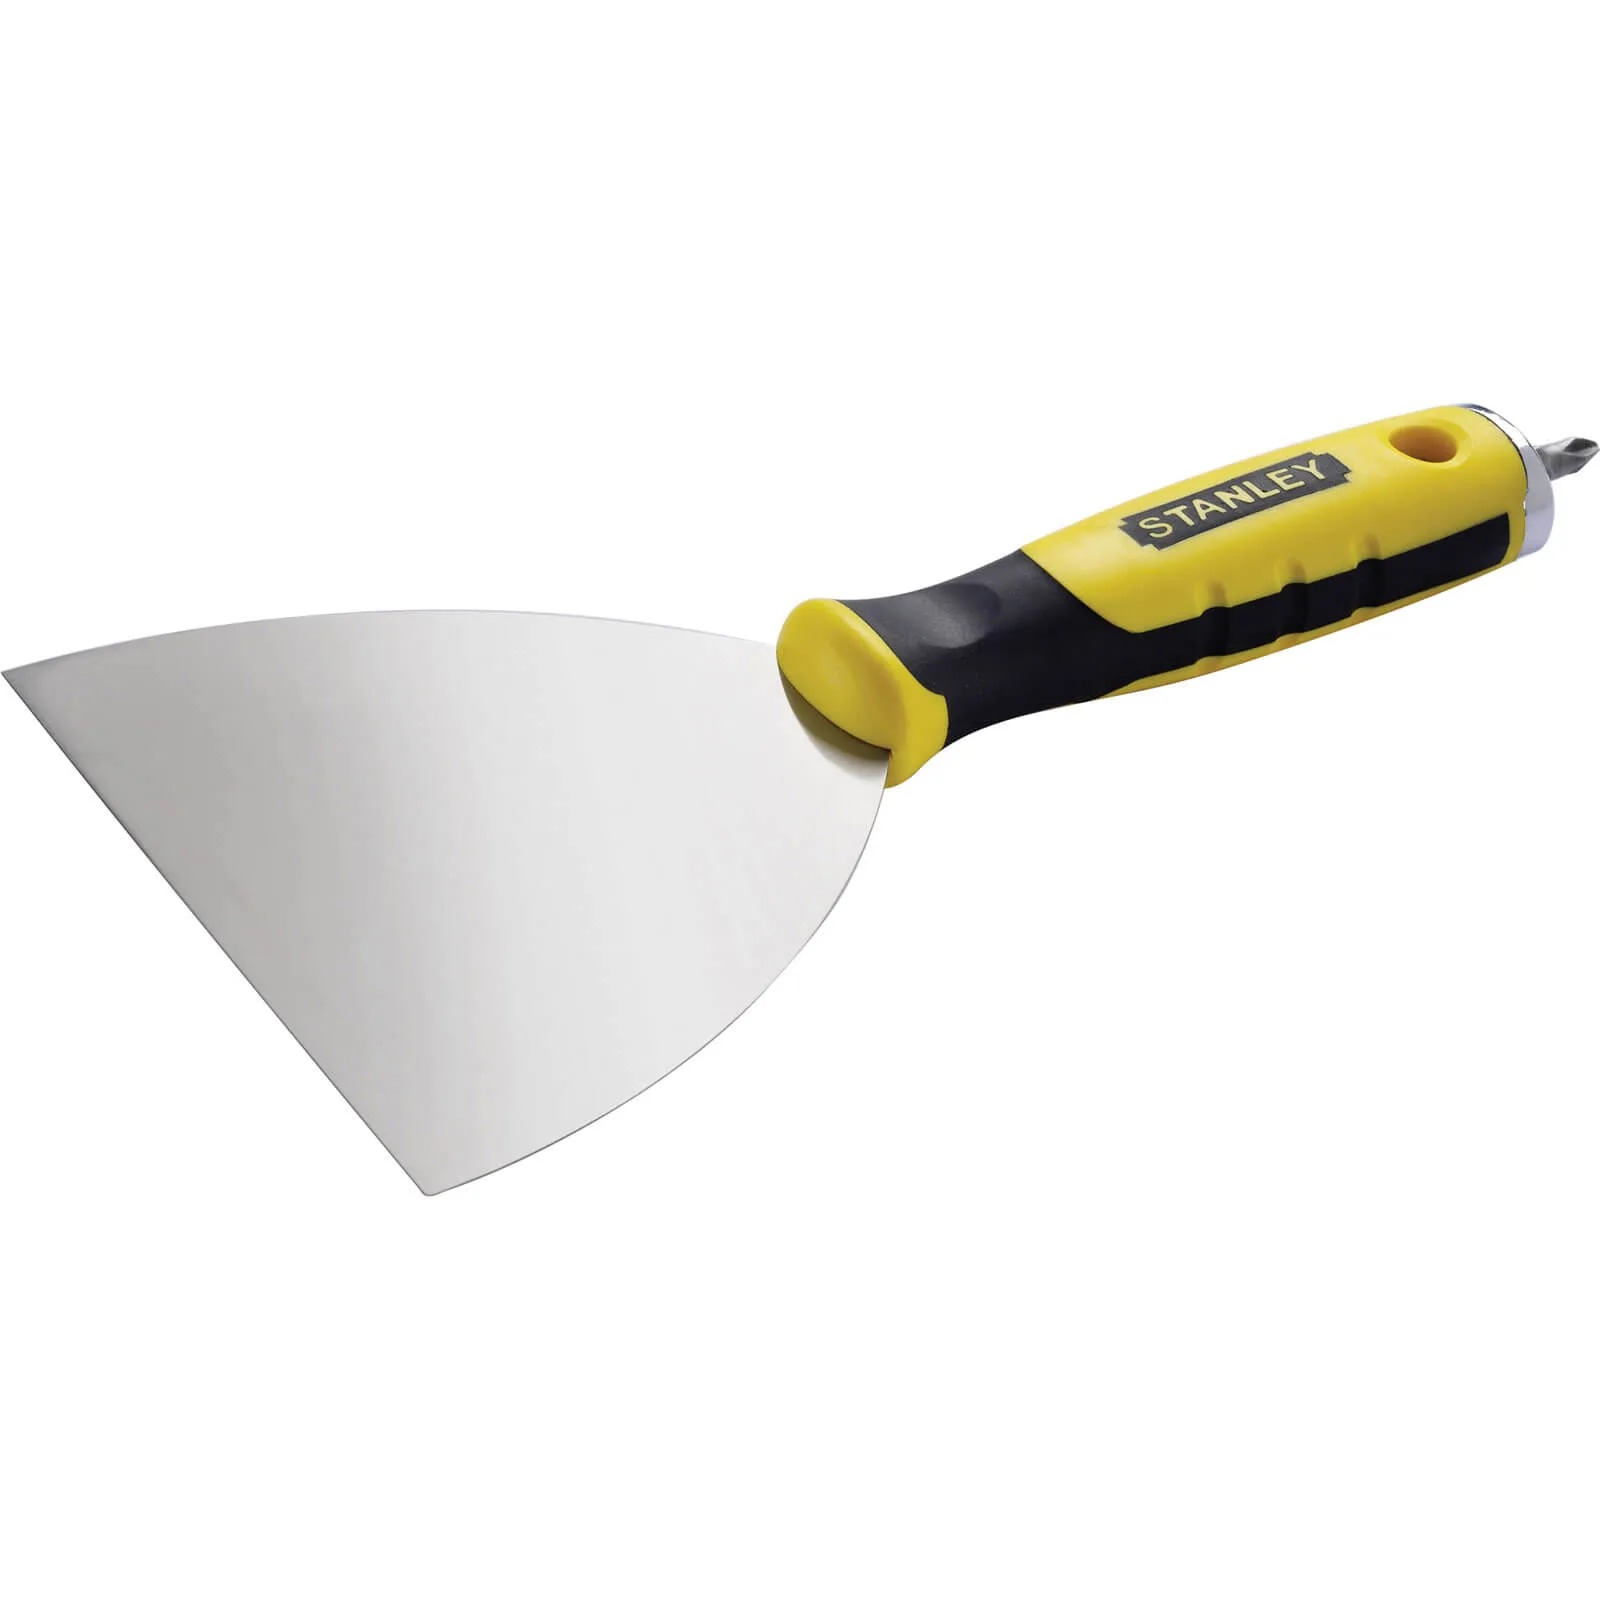 Stanley Stainless Steel Joint Knife with PH2 Bit - 100mm